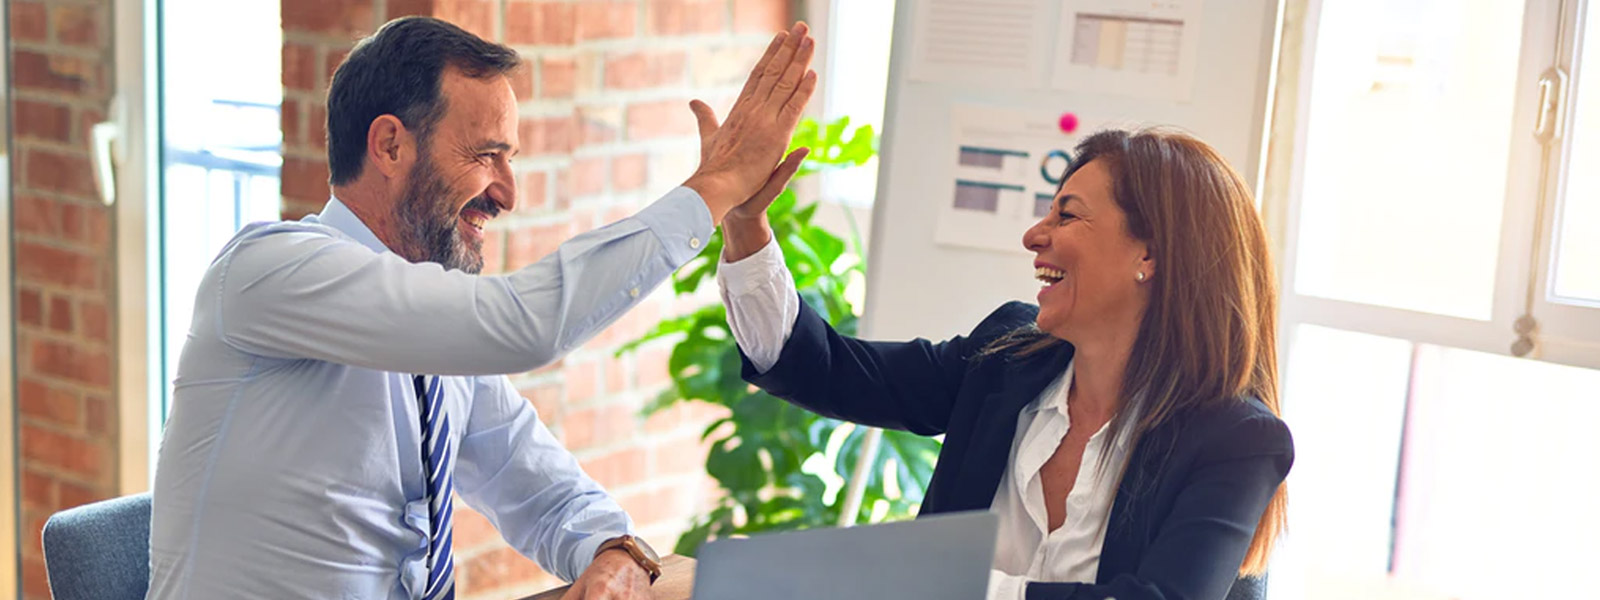 Man and woman giving high five | Business Insurance